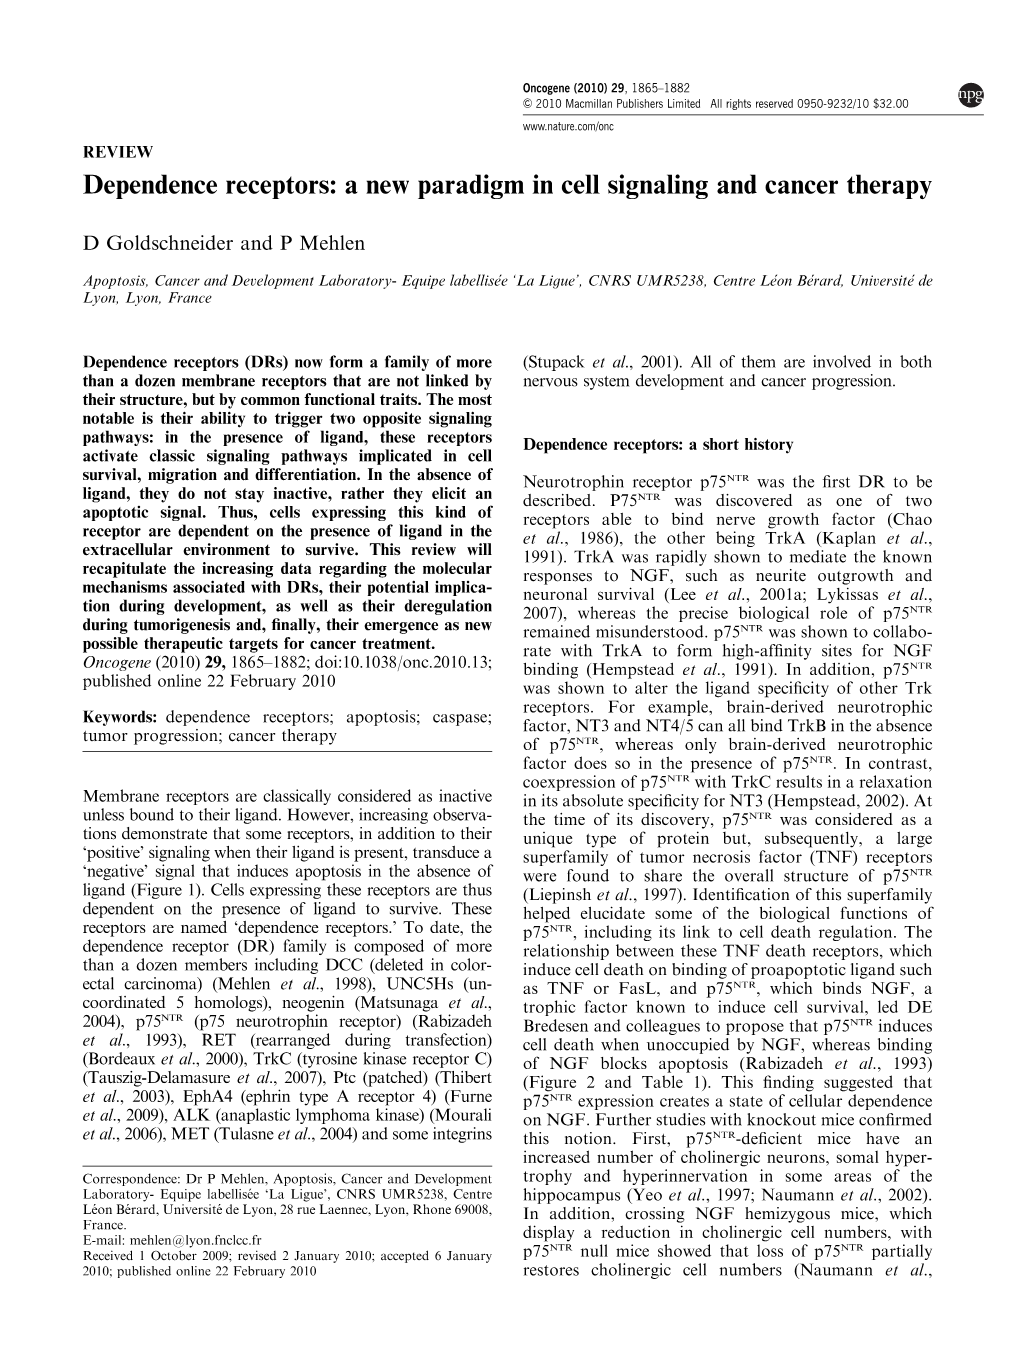 A New Paradigm in Cell Signaling and Cancer Therapy